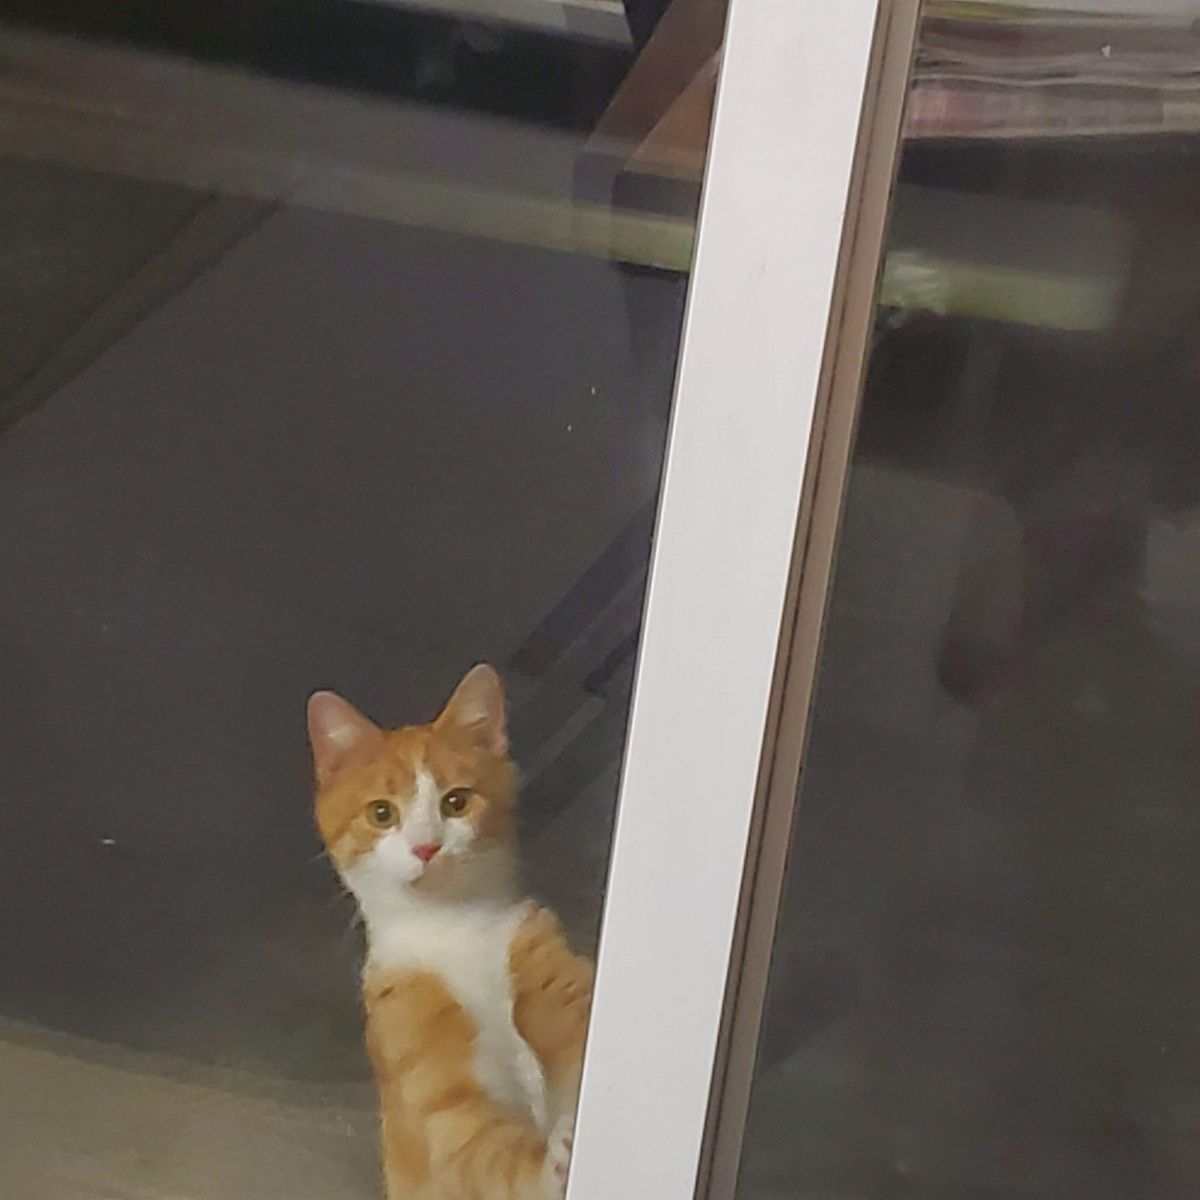 orange and white cat standing on hind legs outside a glass door with the front paws placed on the white door frame